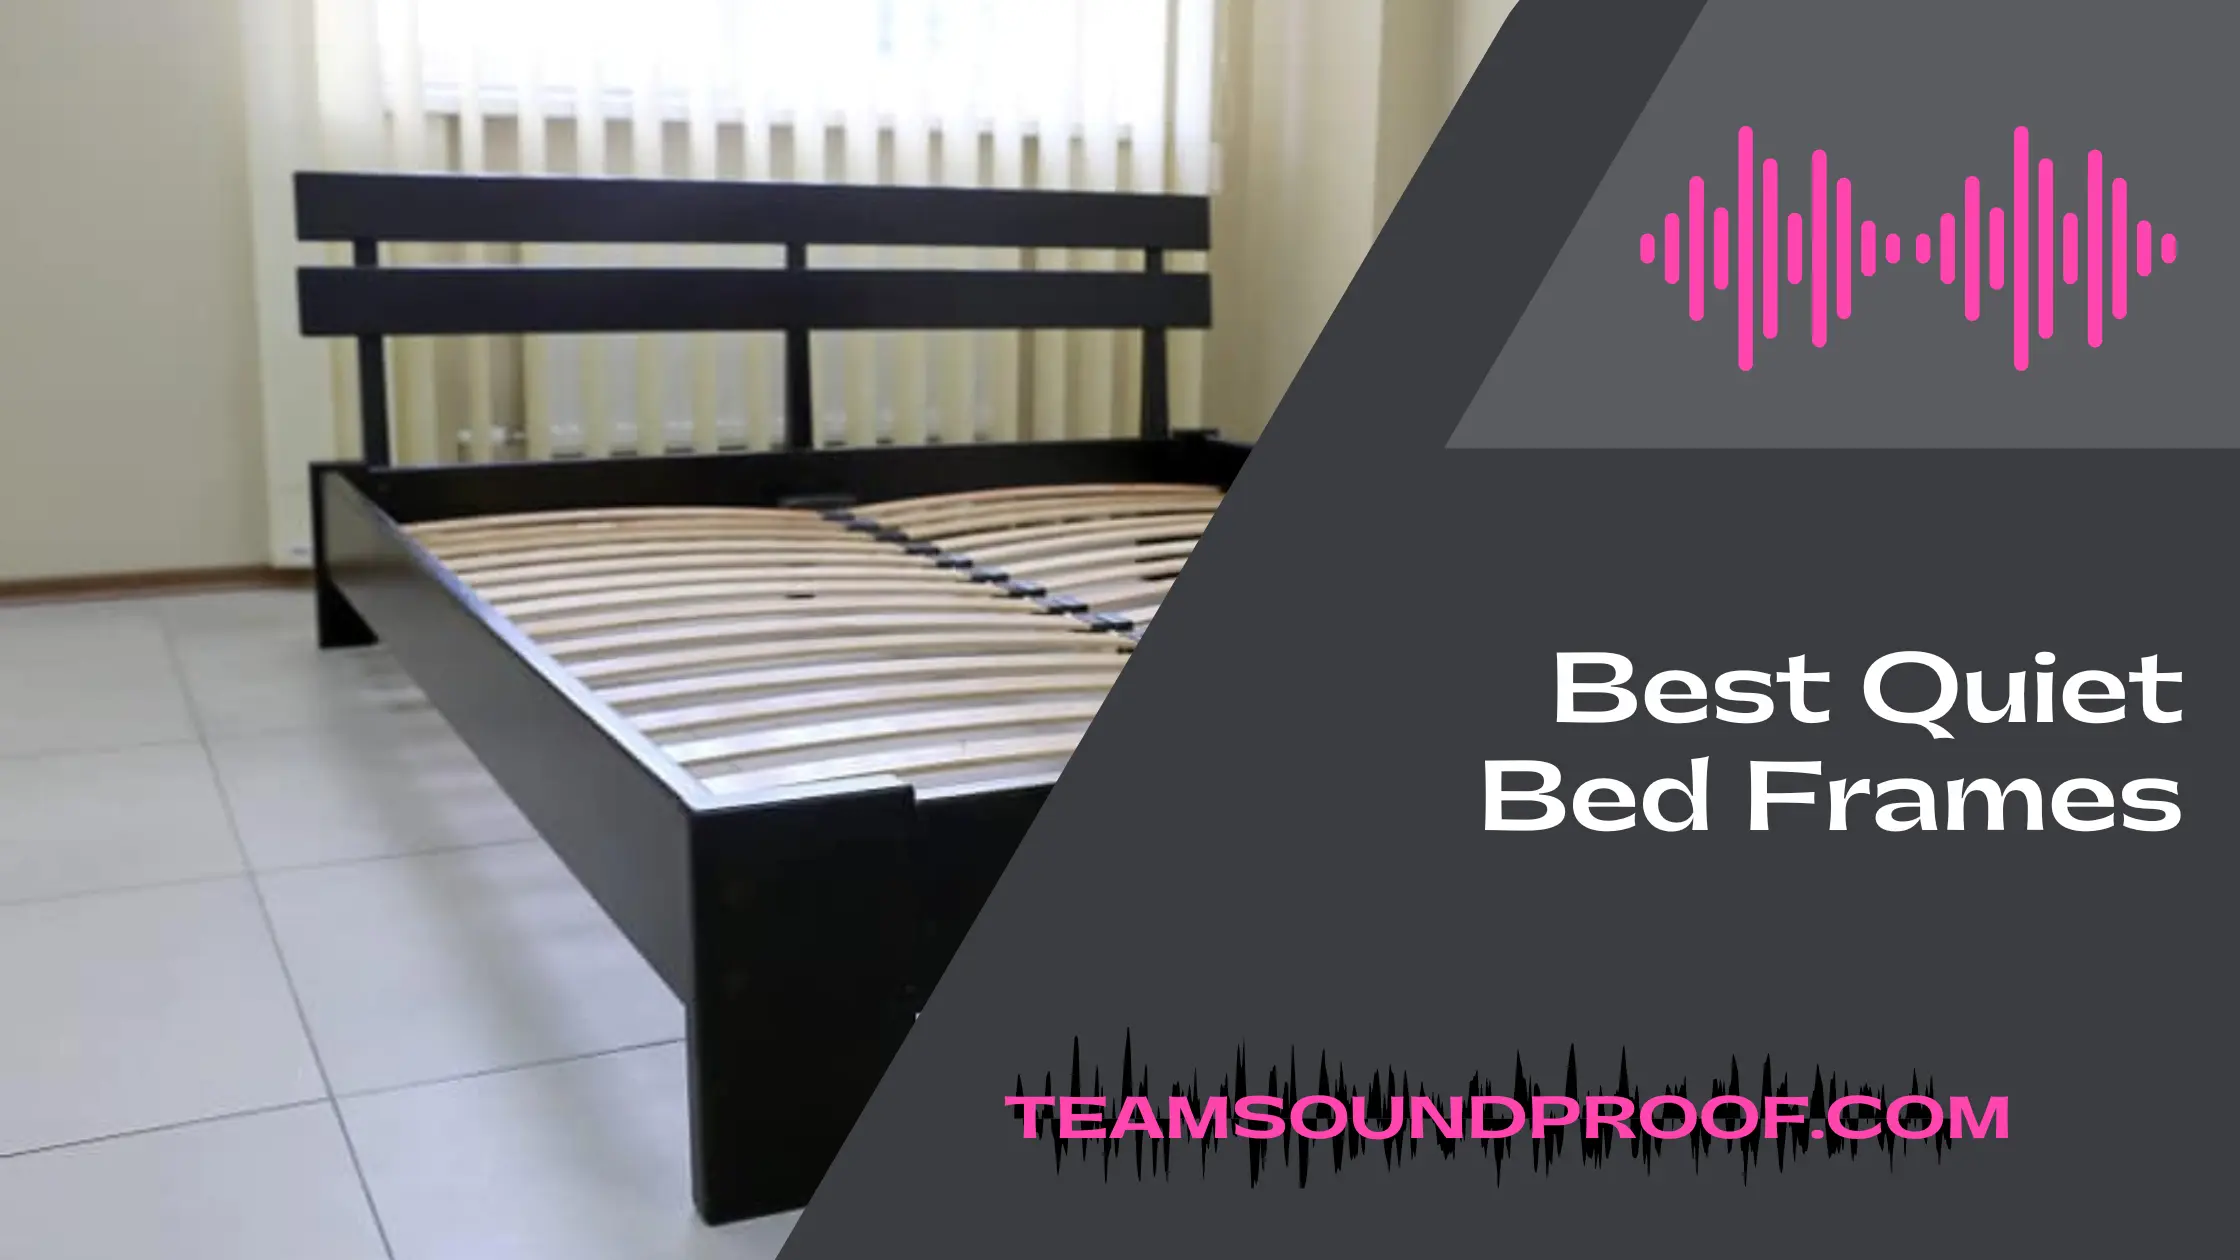 Best Quiet Bed Frames - Latest Guide